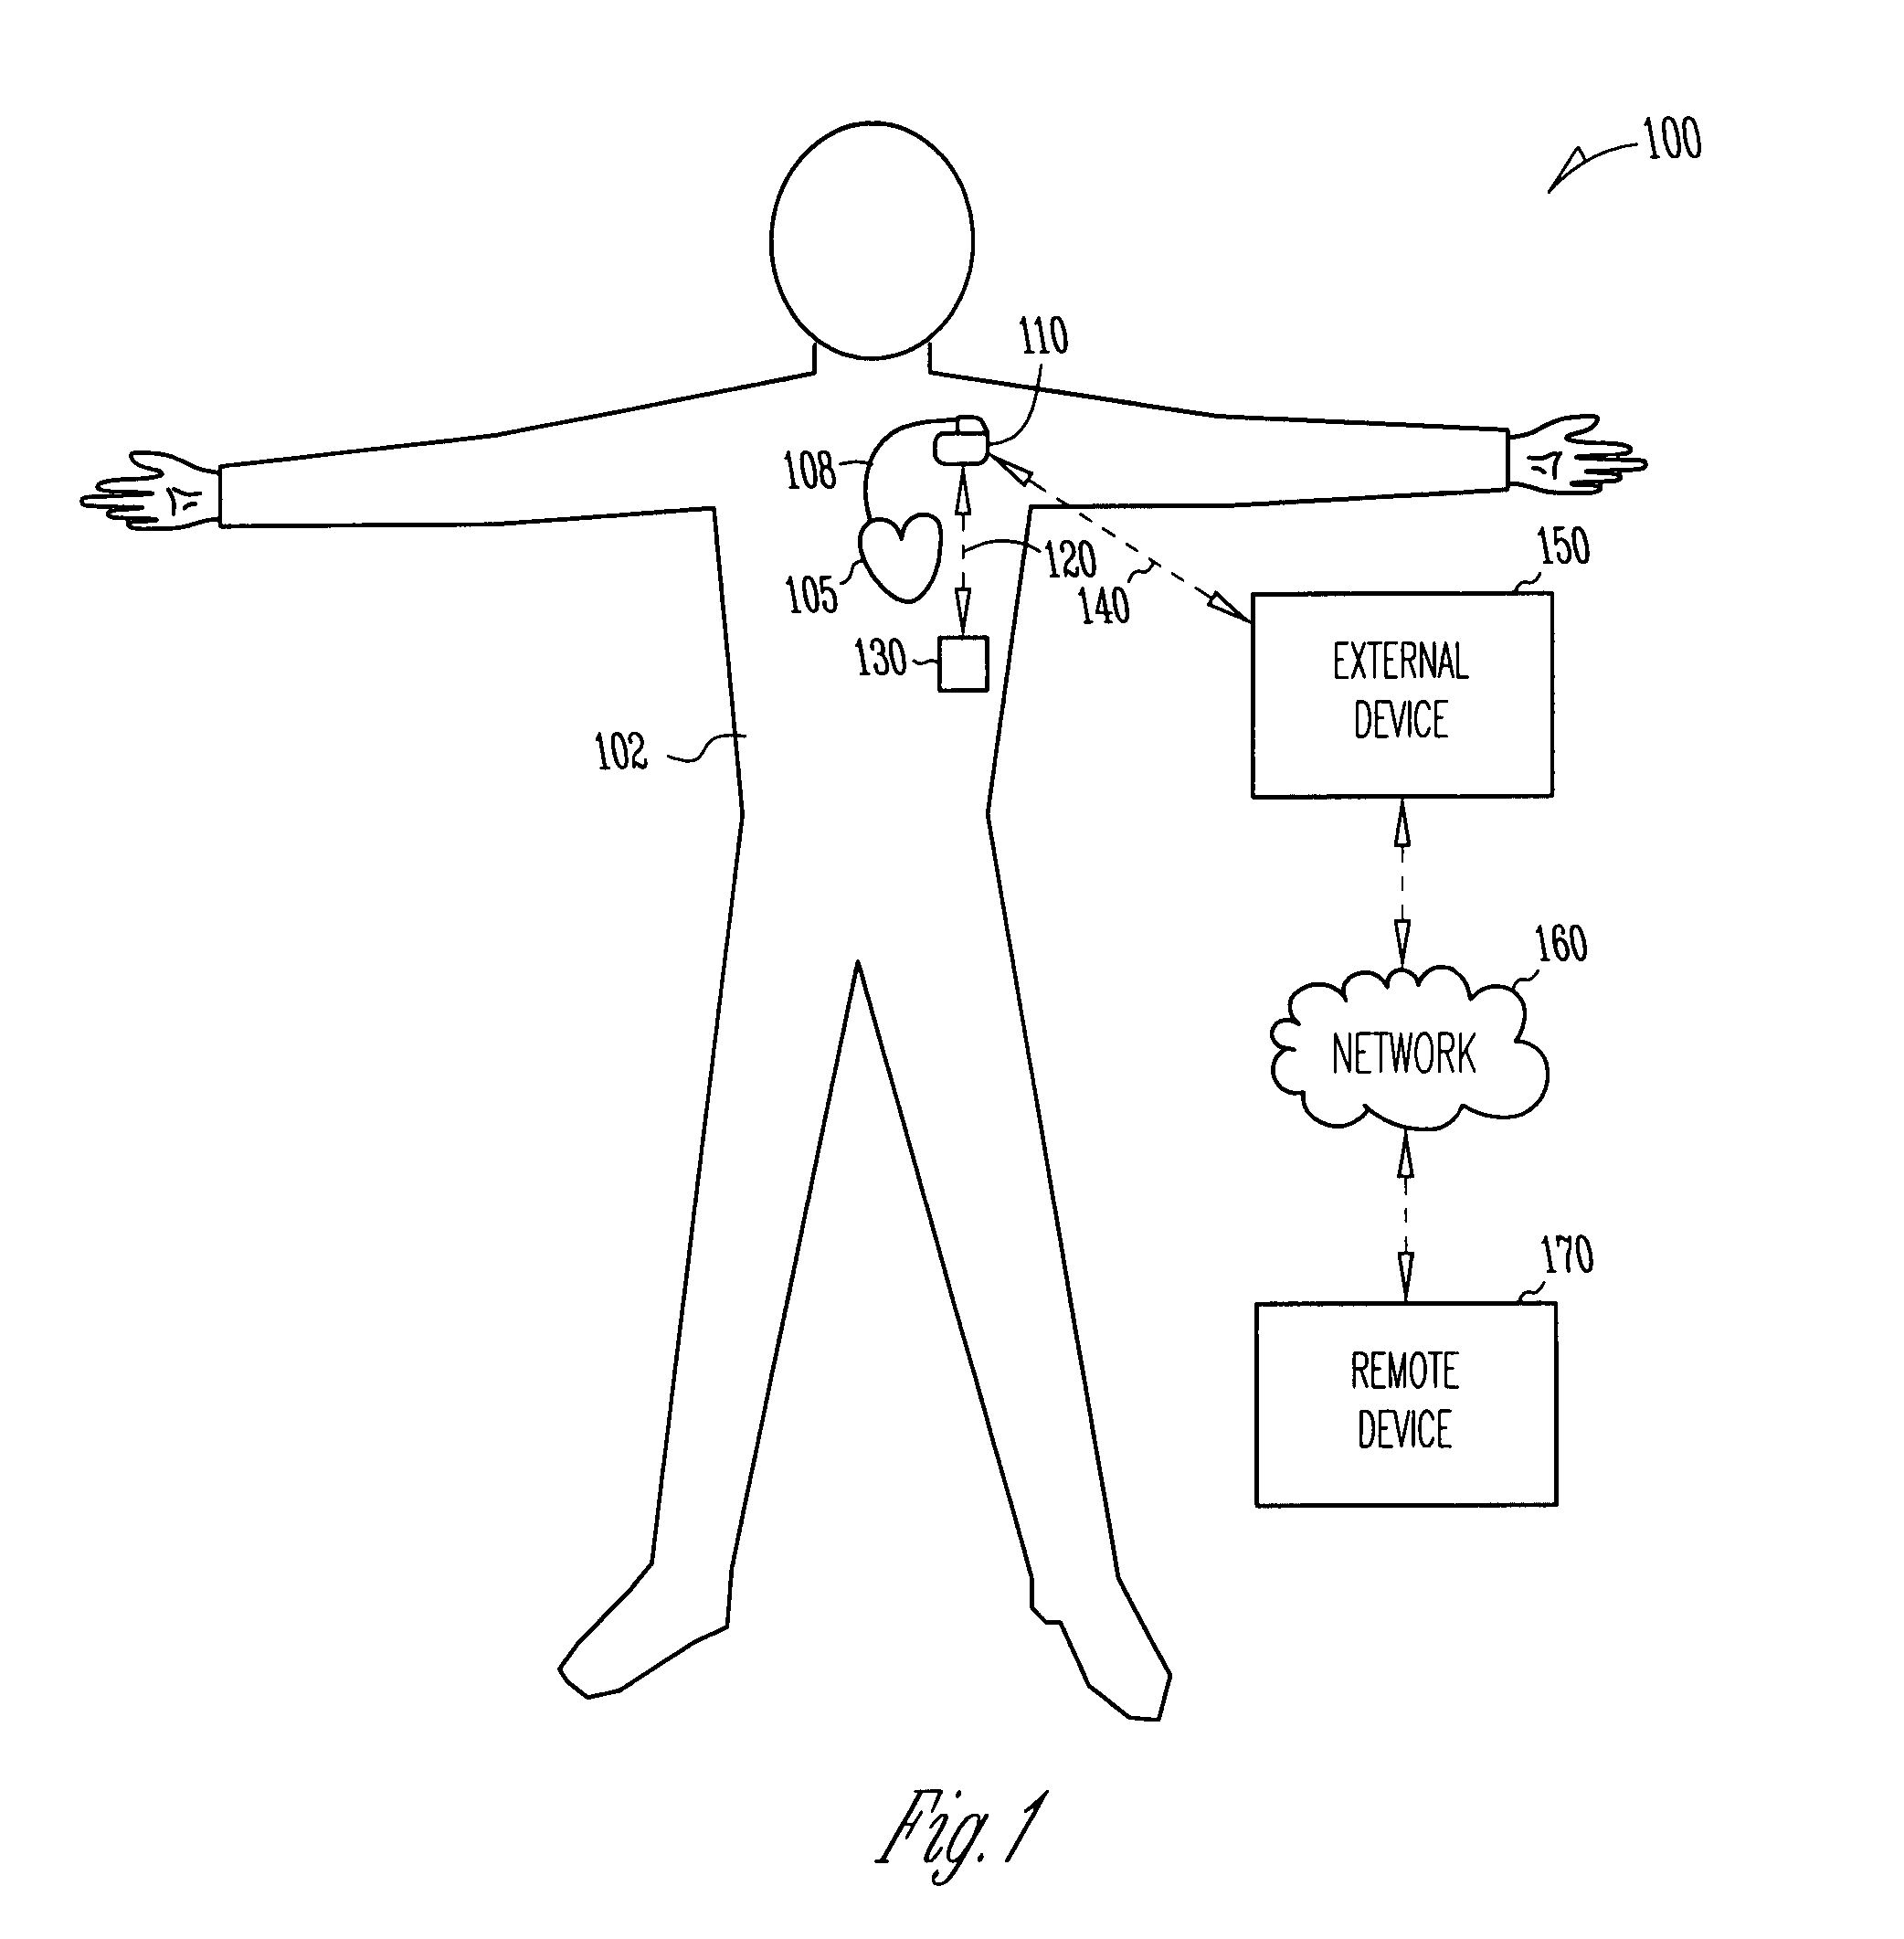 Method and apparatus for modulating cellular metabolism during post-ischemia or heart failure